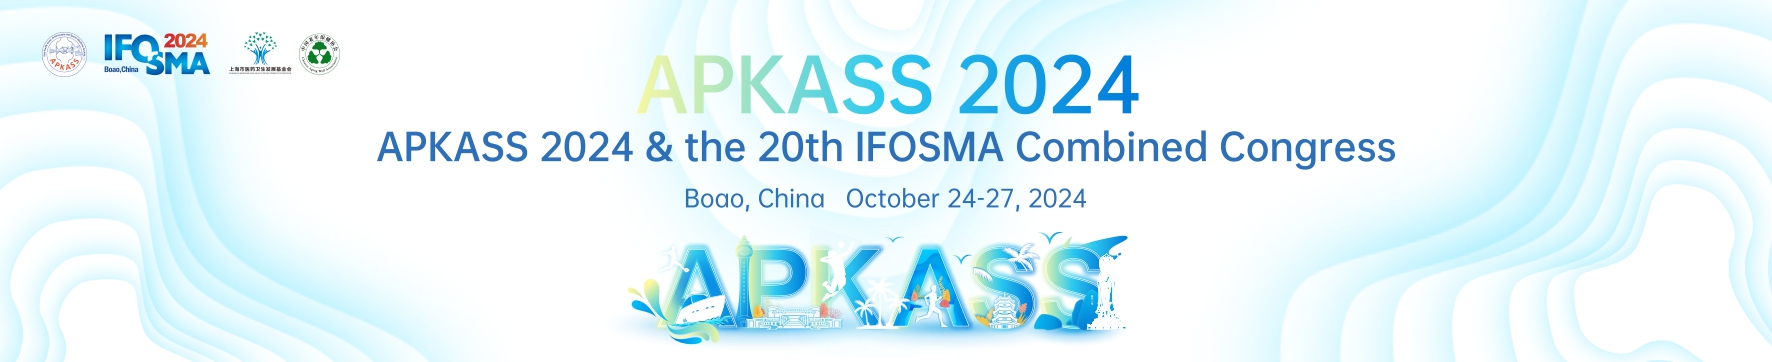 APKASS 2024 & the 20th IFOSMA Combined Congress